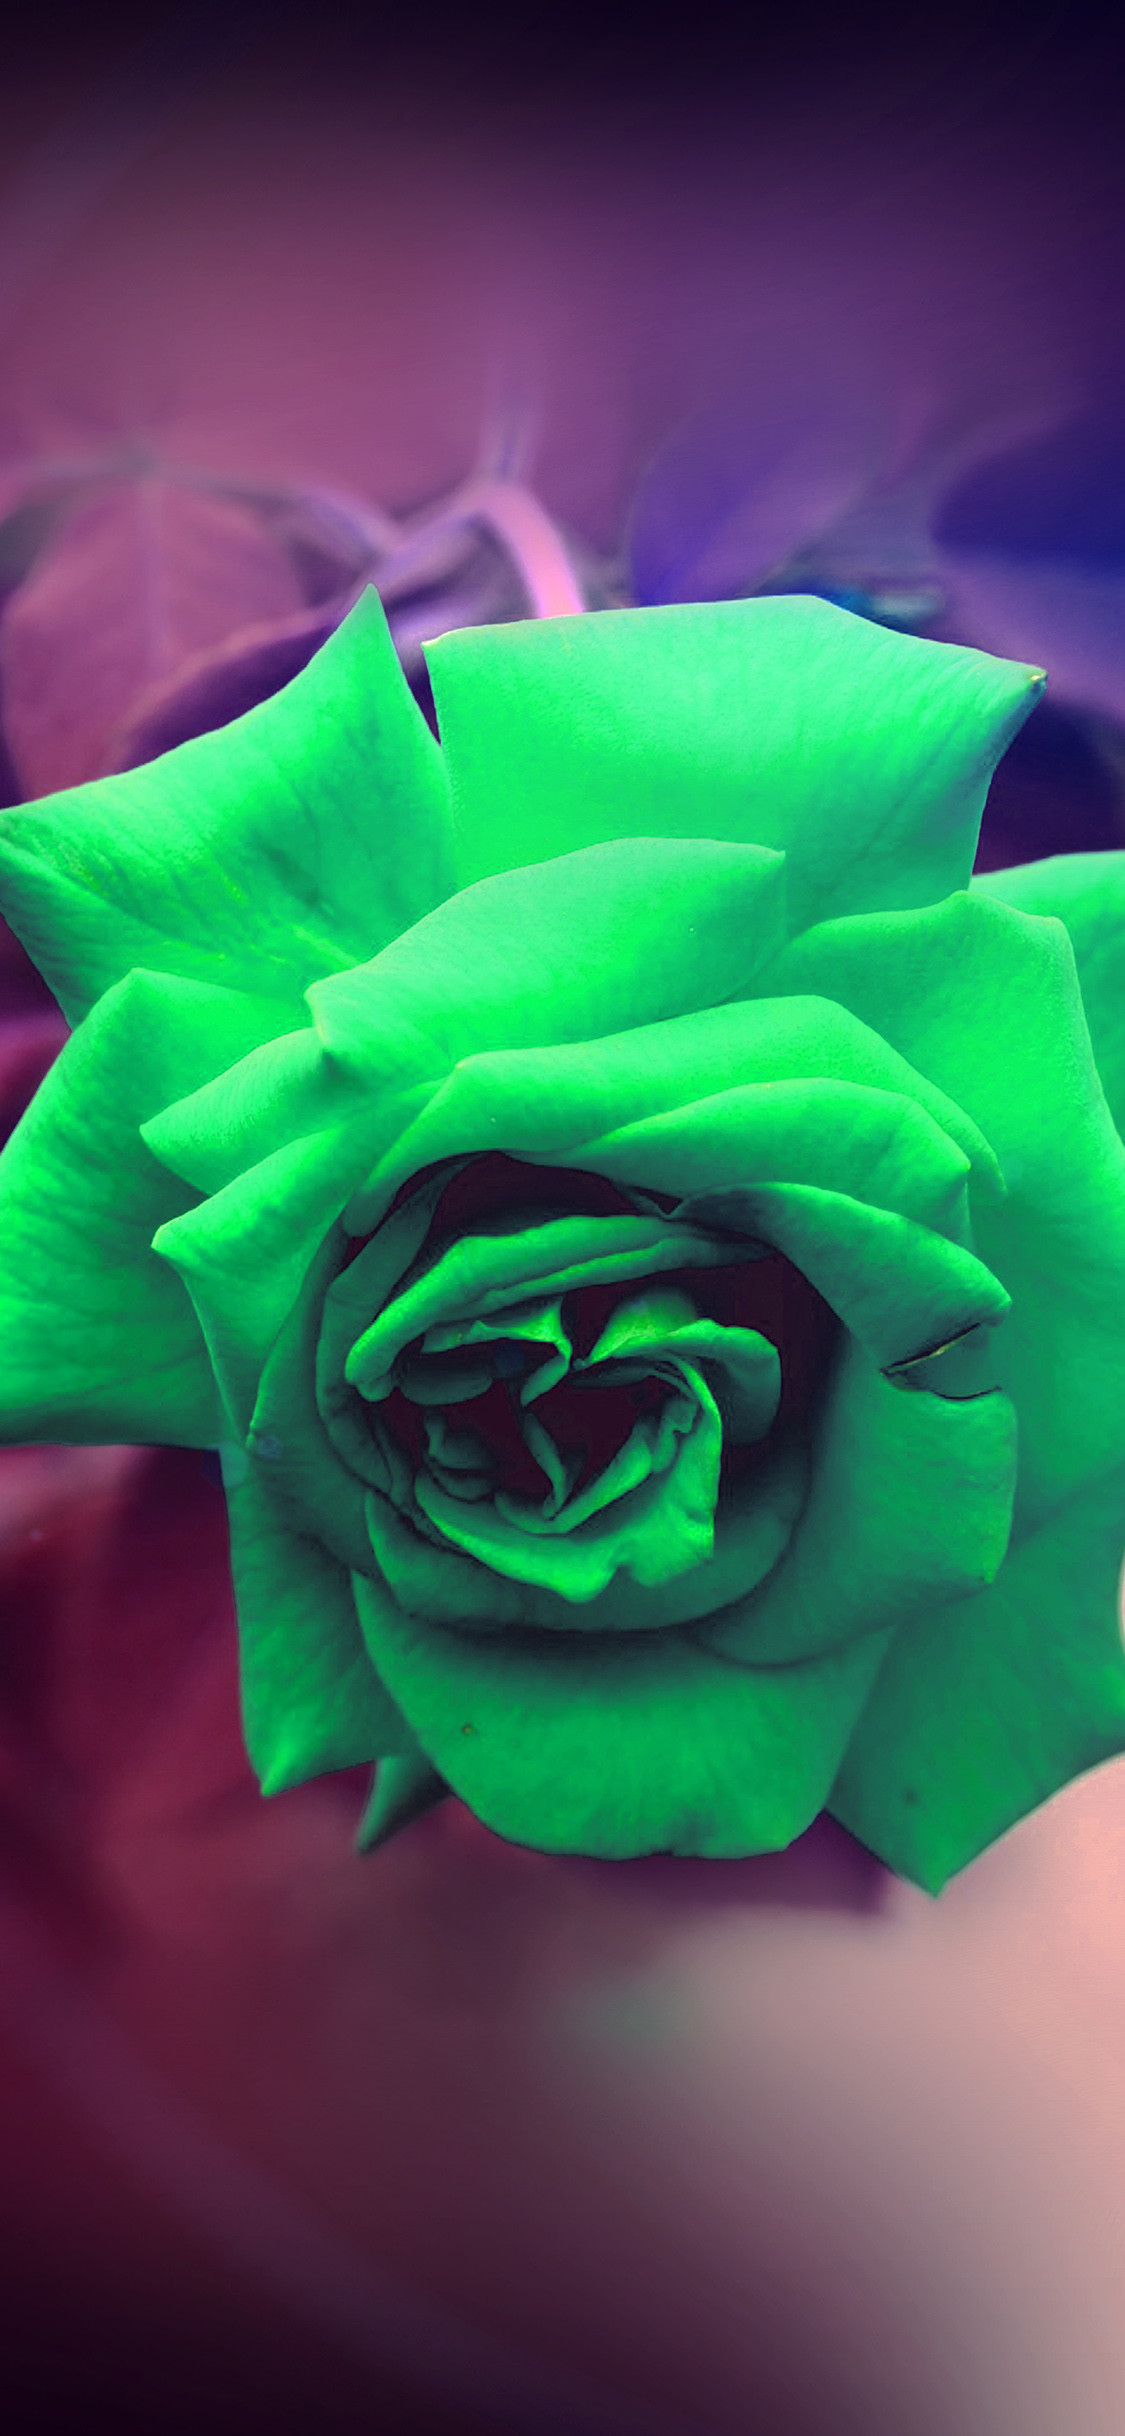 1125x2436 iPhoneXpapers.com | iPhone X wallpaper | my90-green-rose -nature-flower-wood-love-valentine-flare